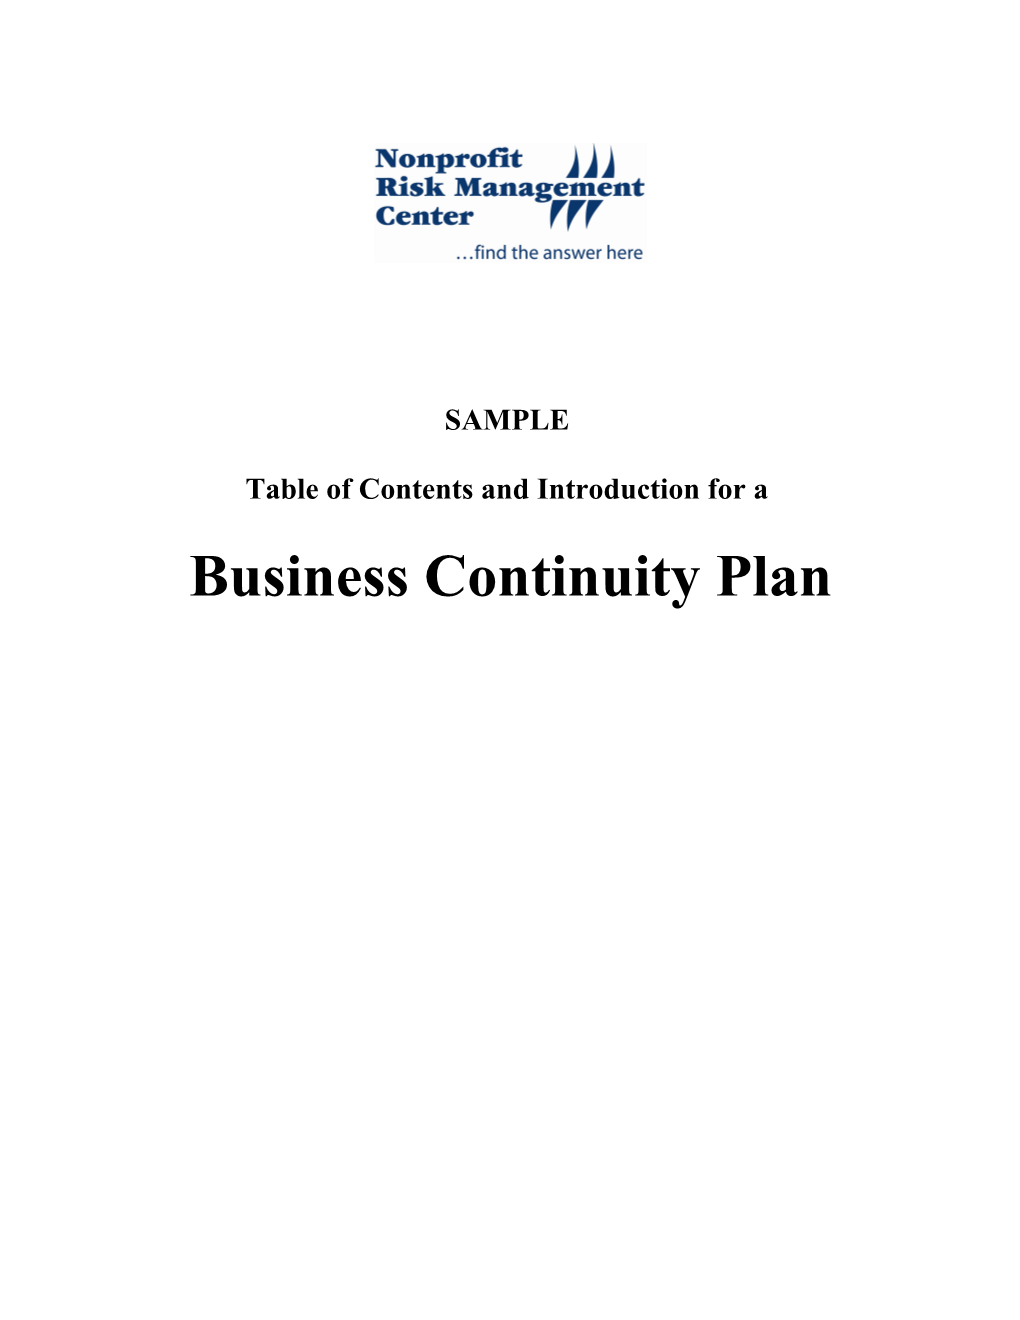 SAMPLE Business Continuity Plan